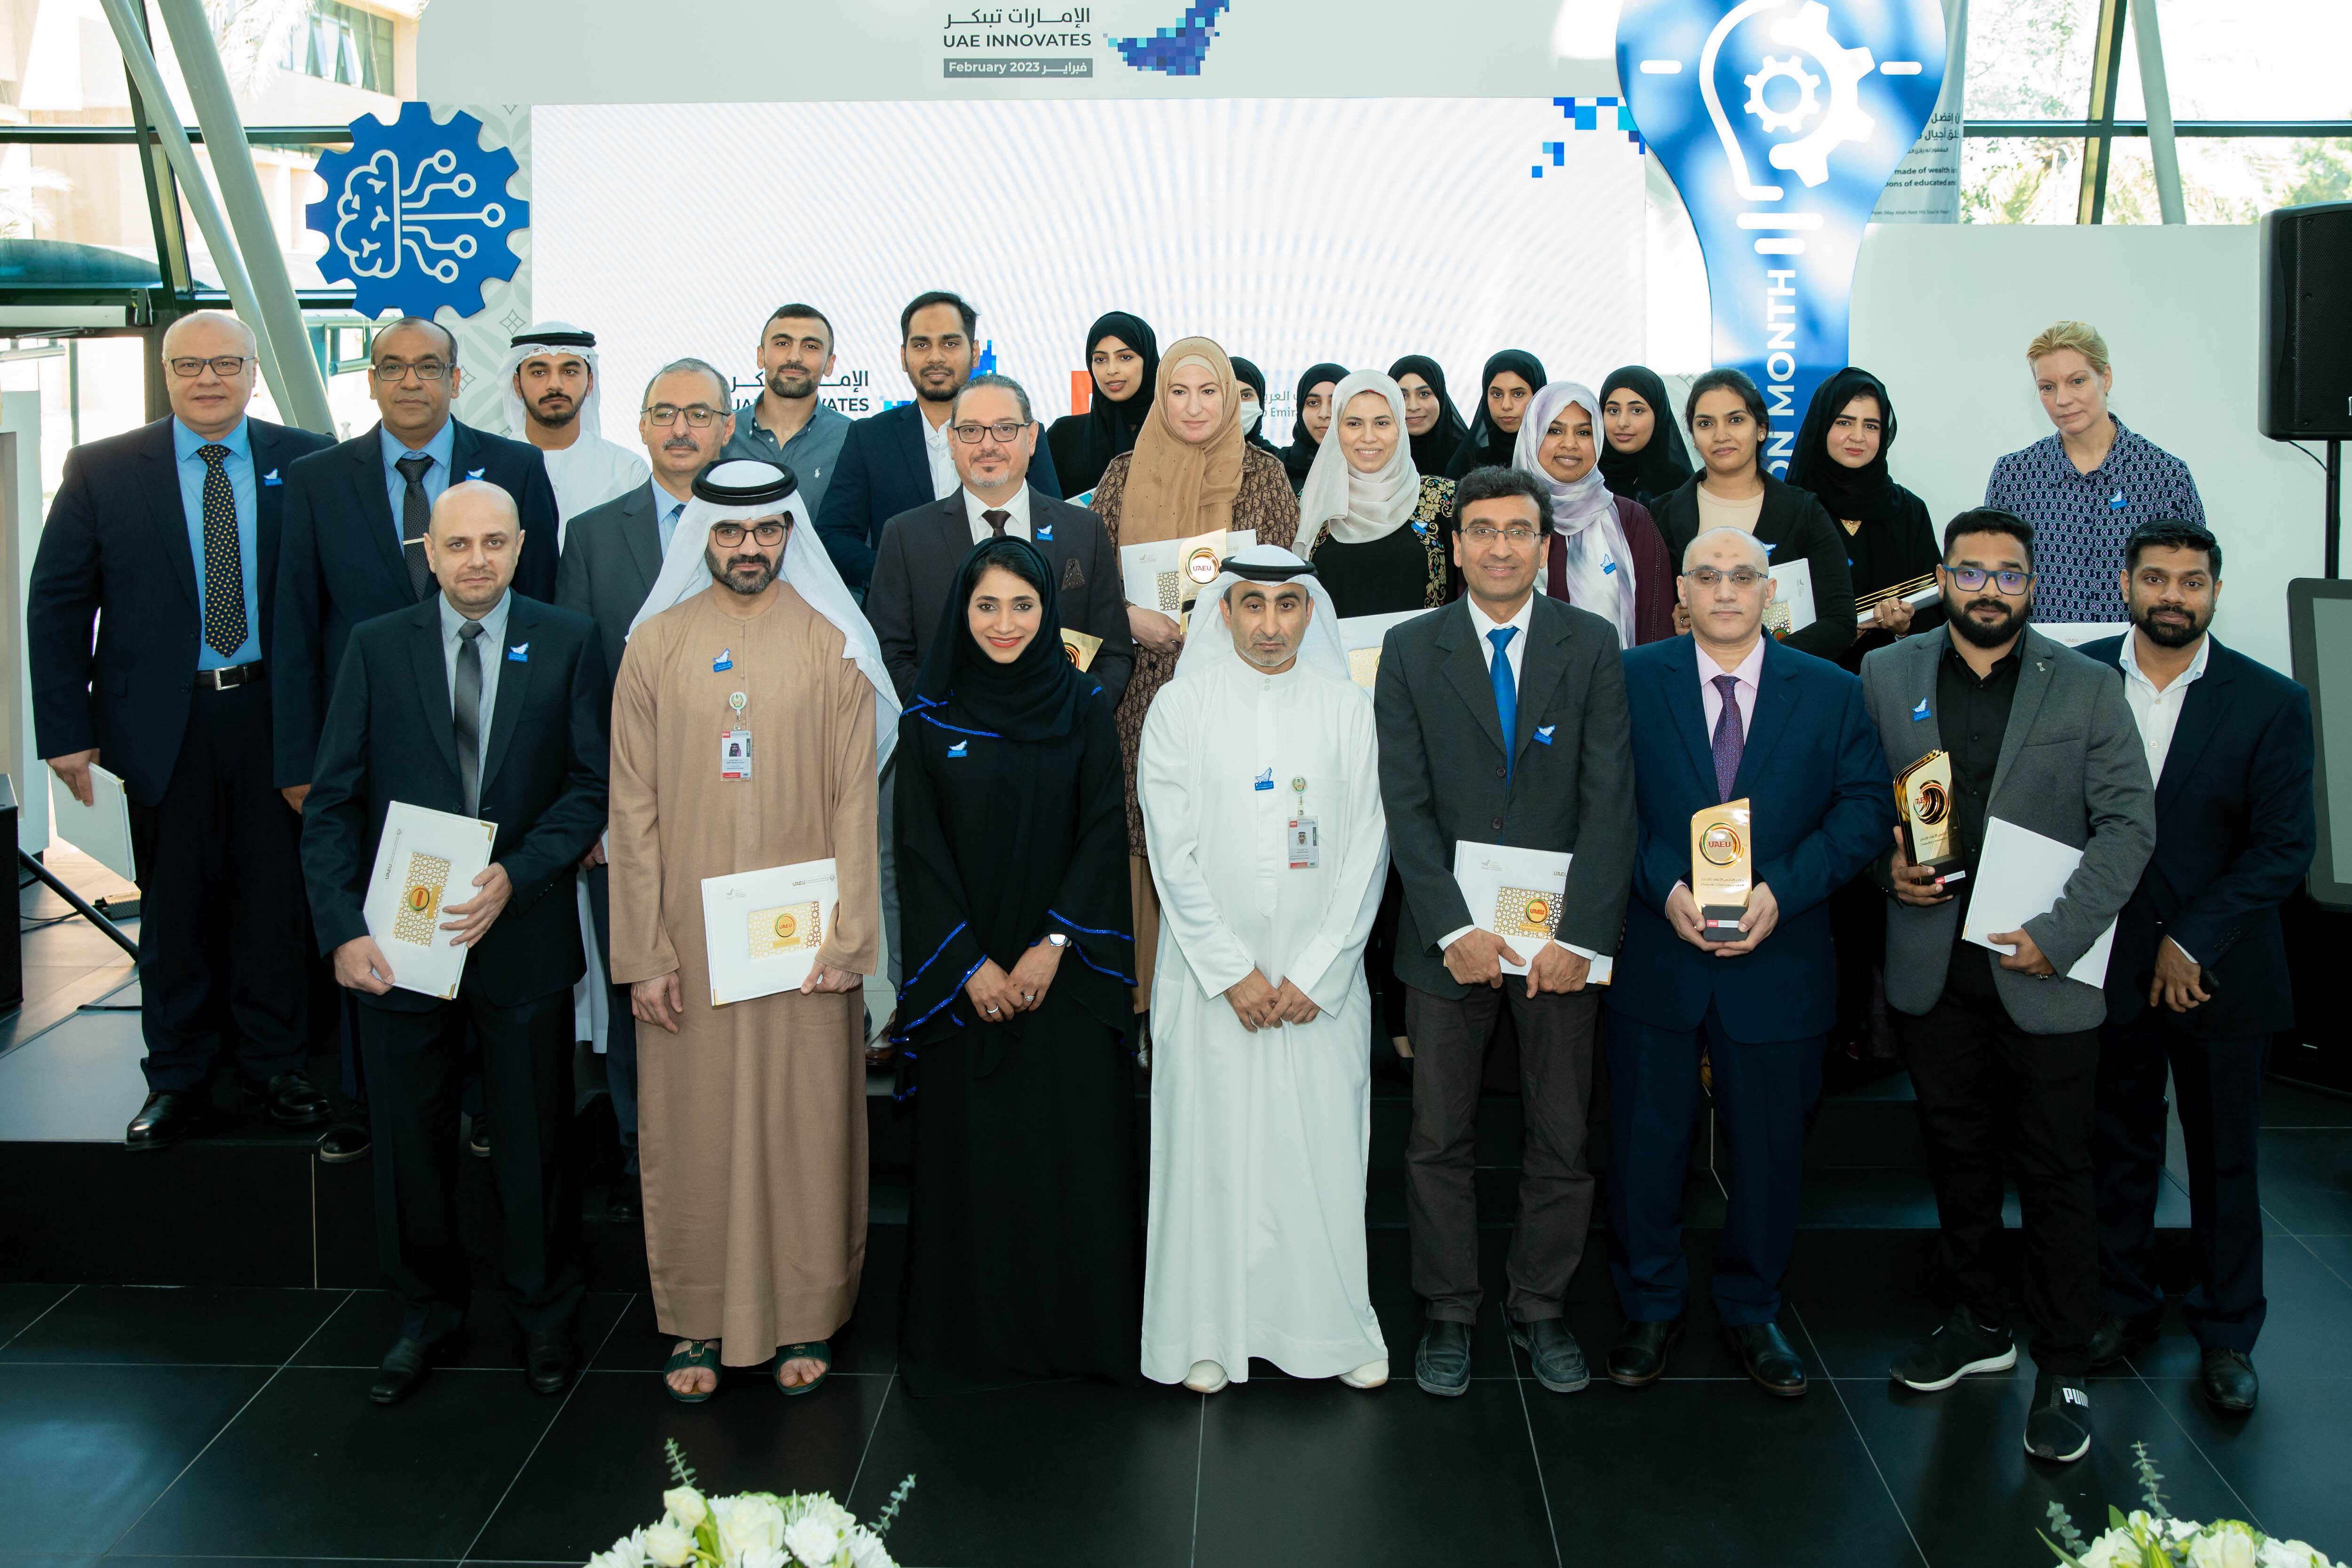 UAE University honors the winners of the 8th Chancellor's Innovation Award 2023